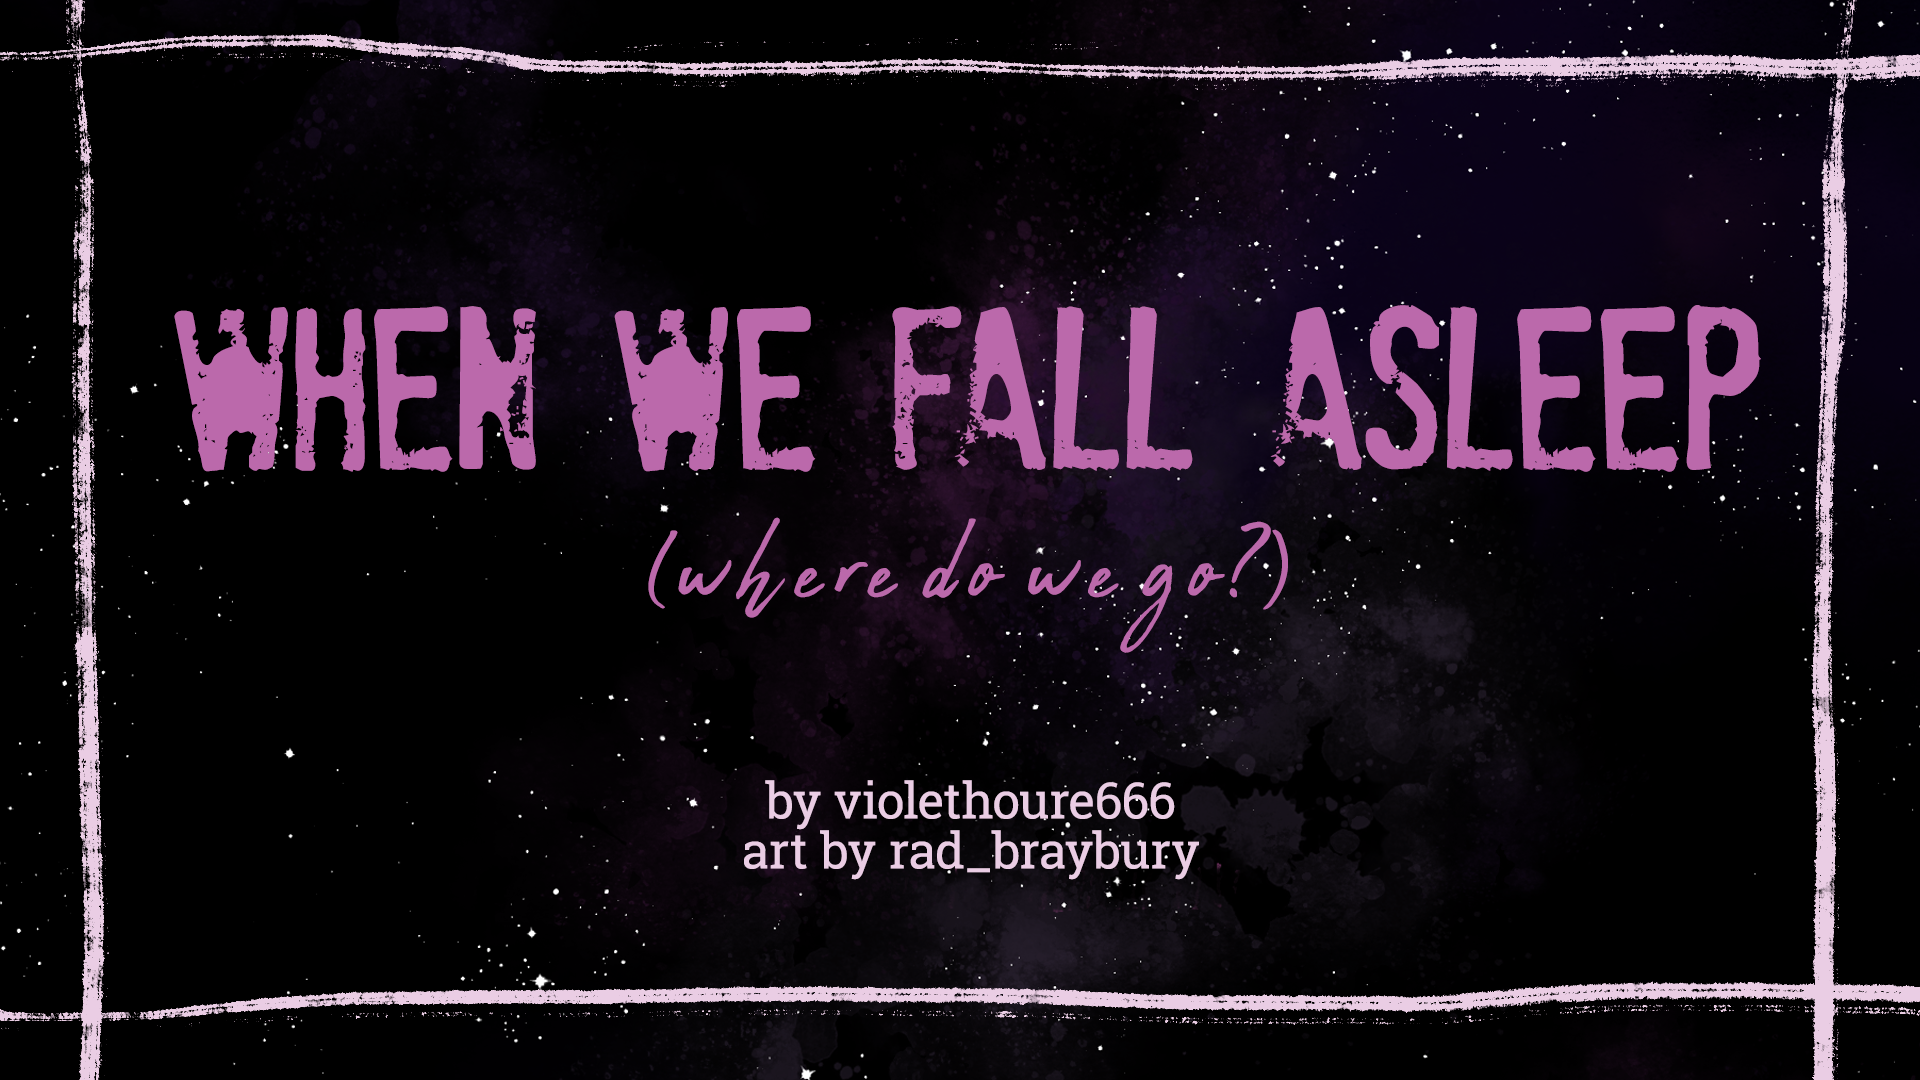 Title Card: When we fall asleep, where do we go? Story by Violet Hour 666, Art by Rad Braybury